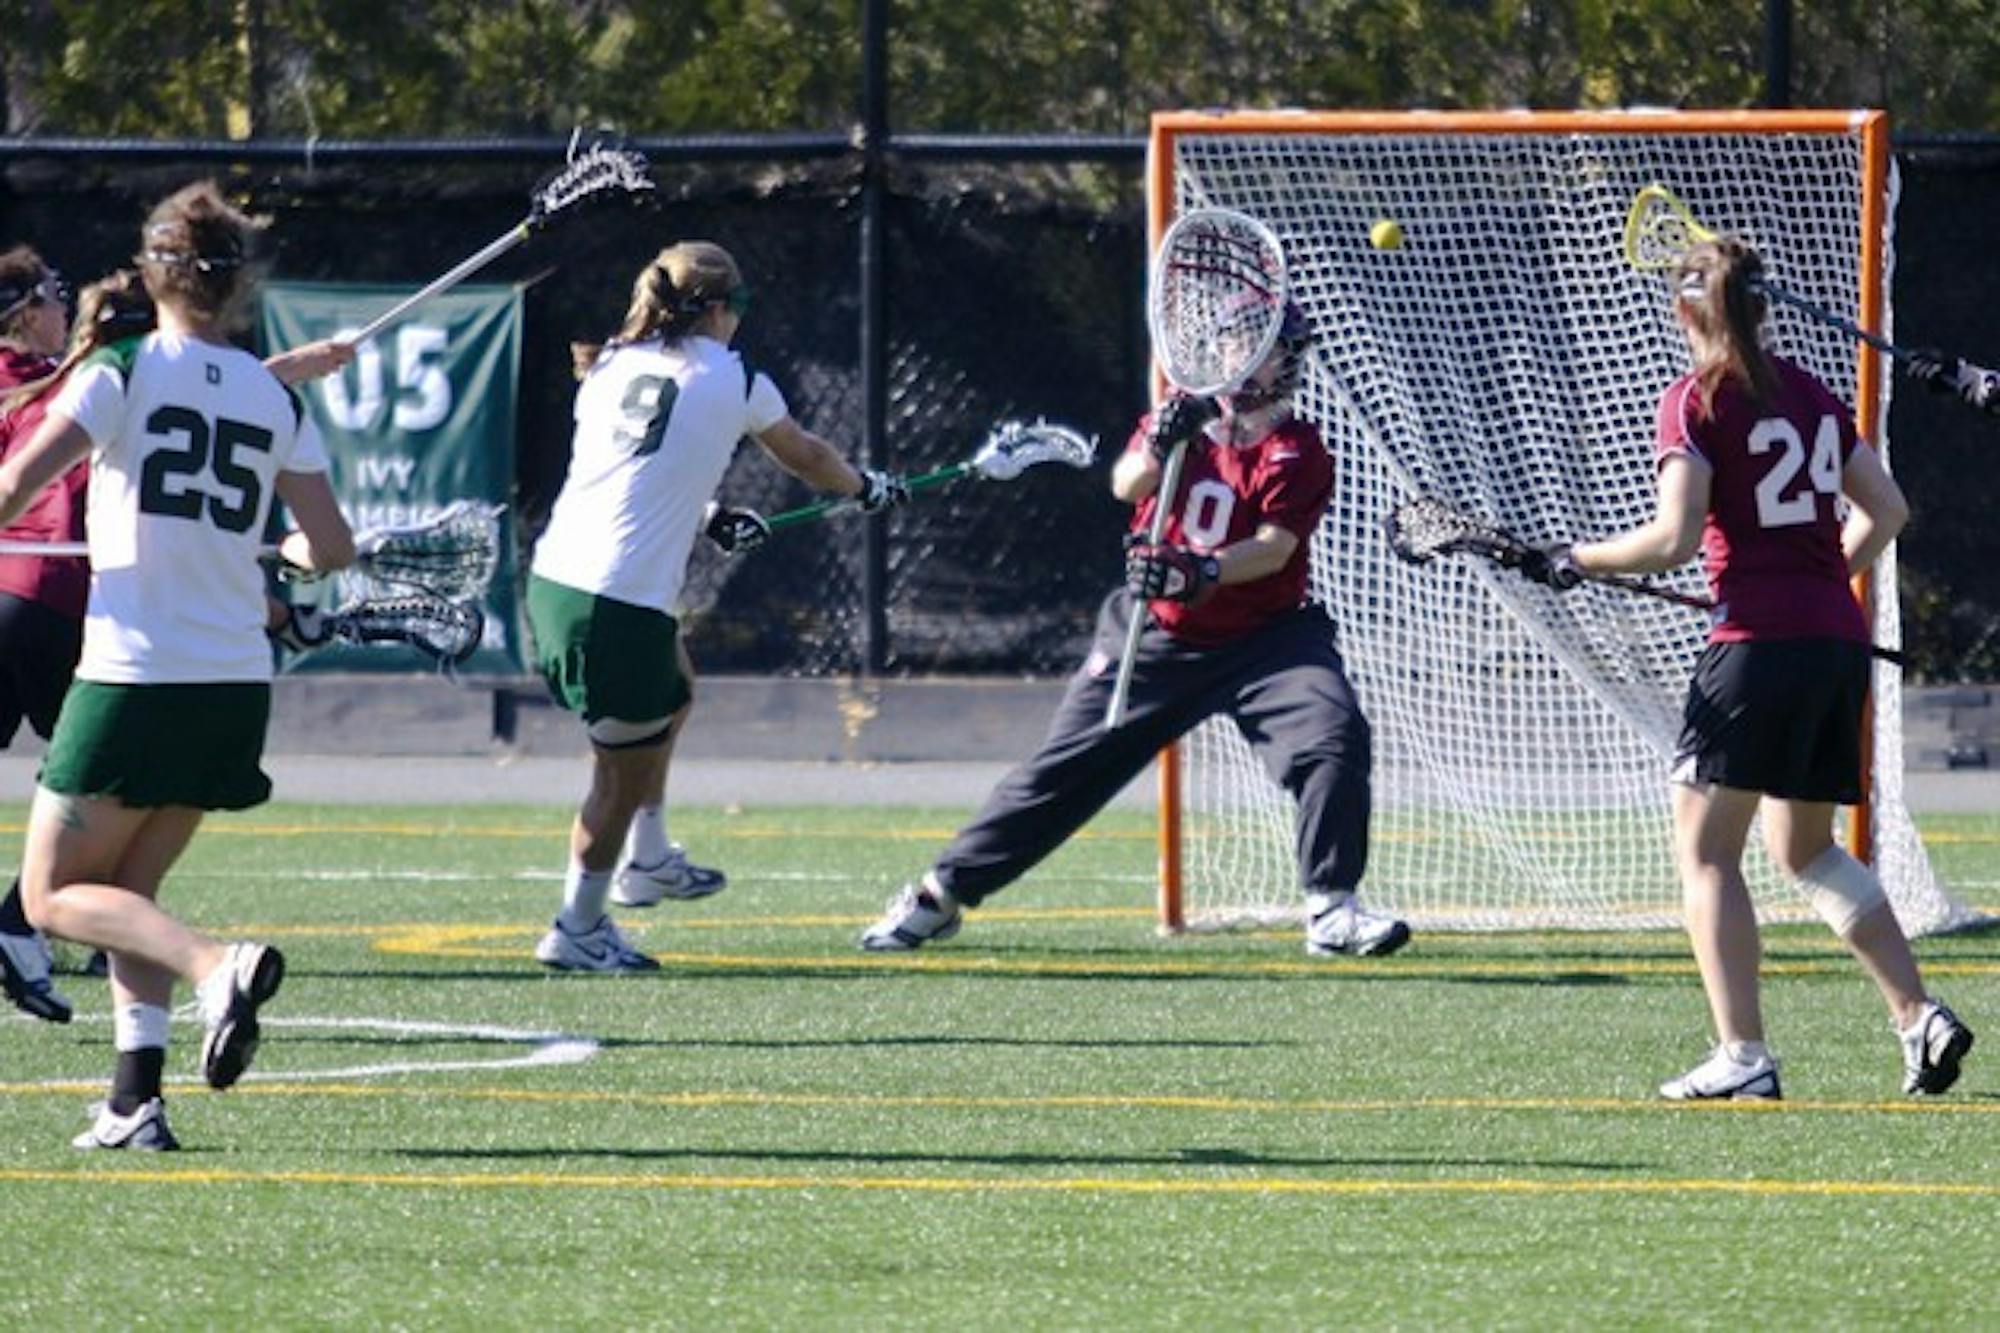 Bolstered by an unrelenting offense, including a goal by Sarah Plumb '12, the team cruised to a 13-6 victory.